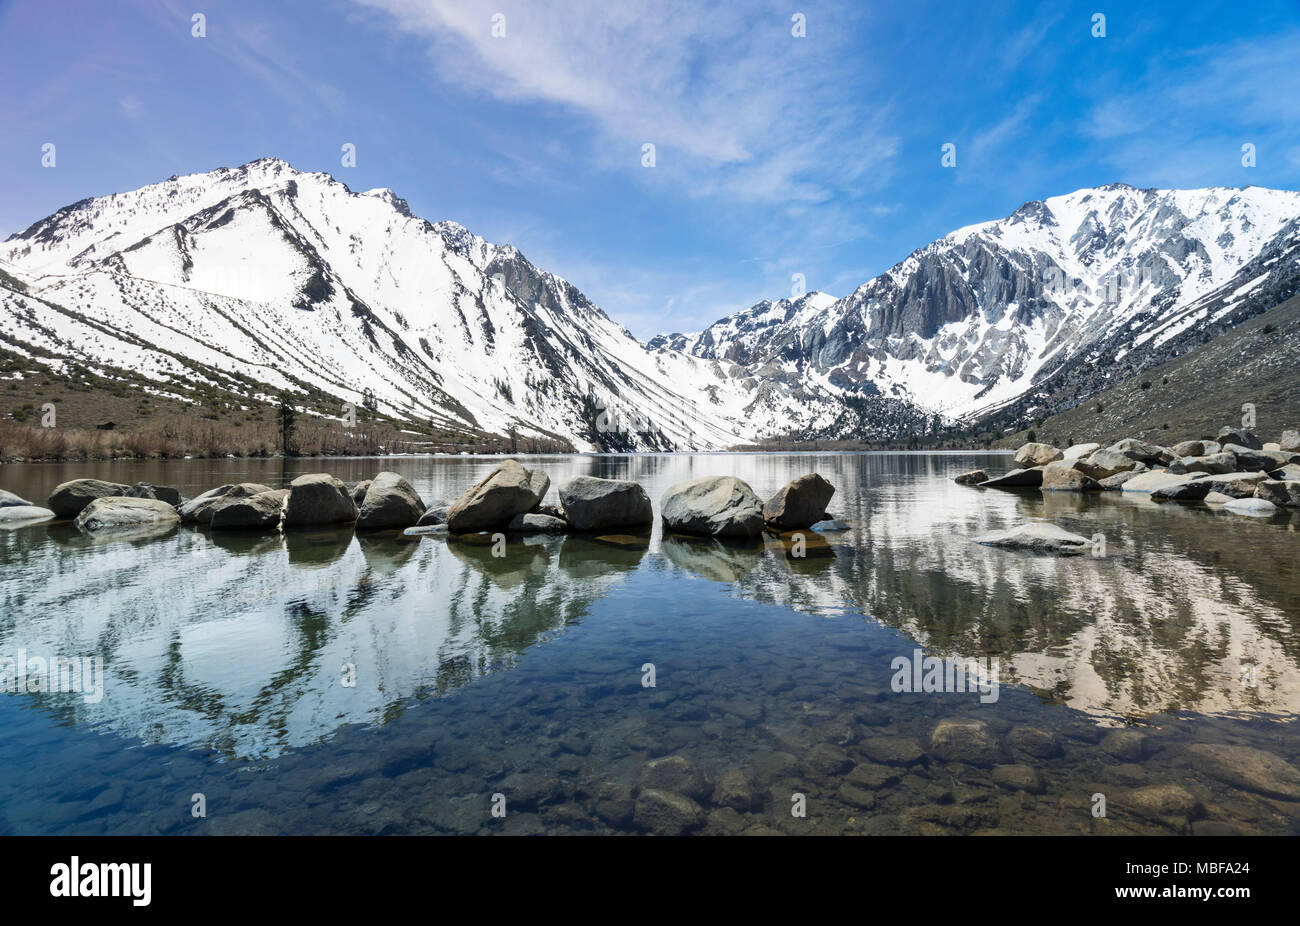 Reflection of snow covered mountains in a calm Convict Lake in Sierra Nevada California, USA Stock Photo